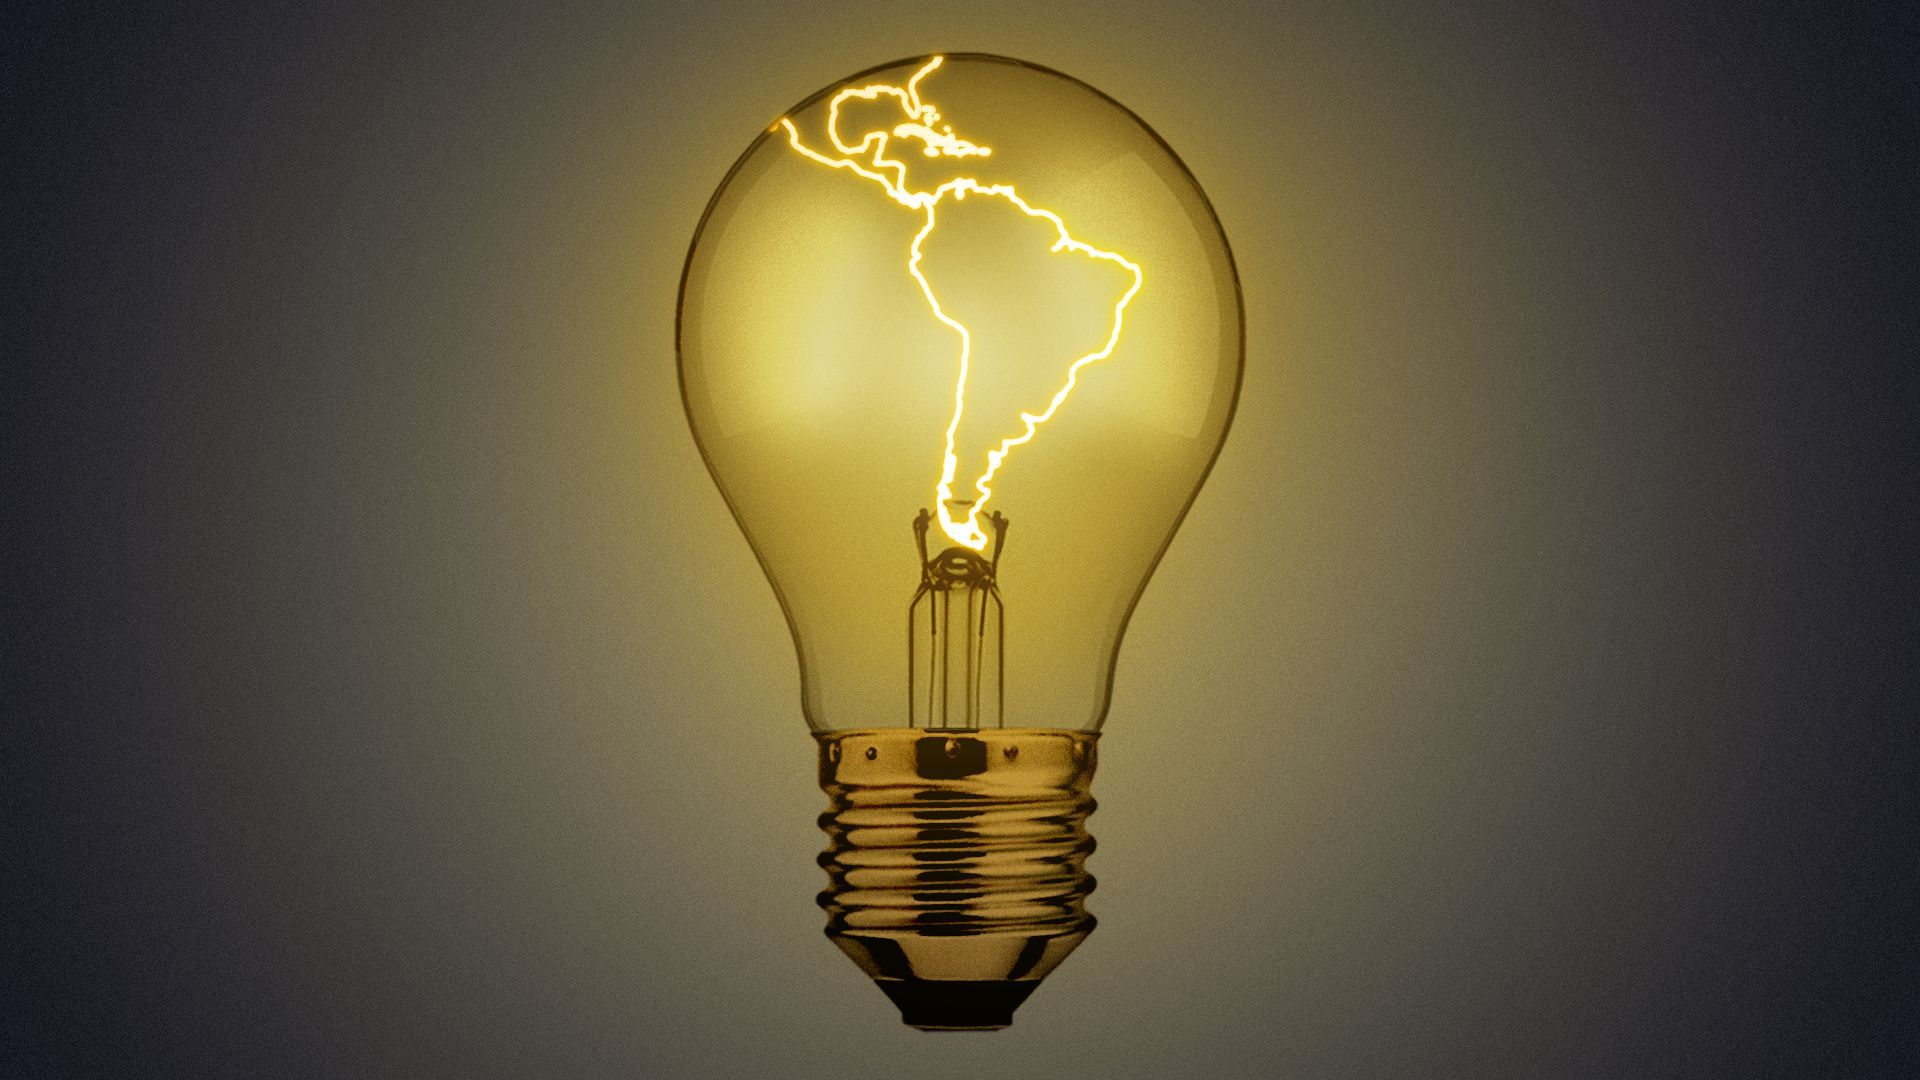 Illustration of a light bulb with a filament in the shape of Central and South America.